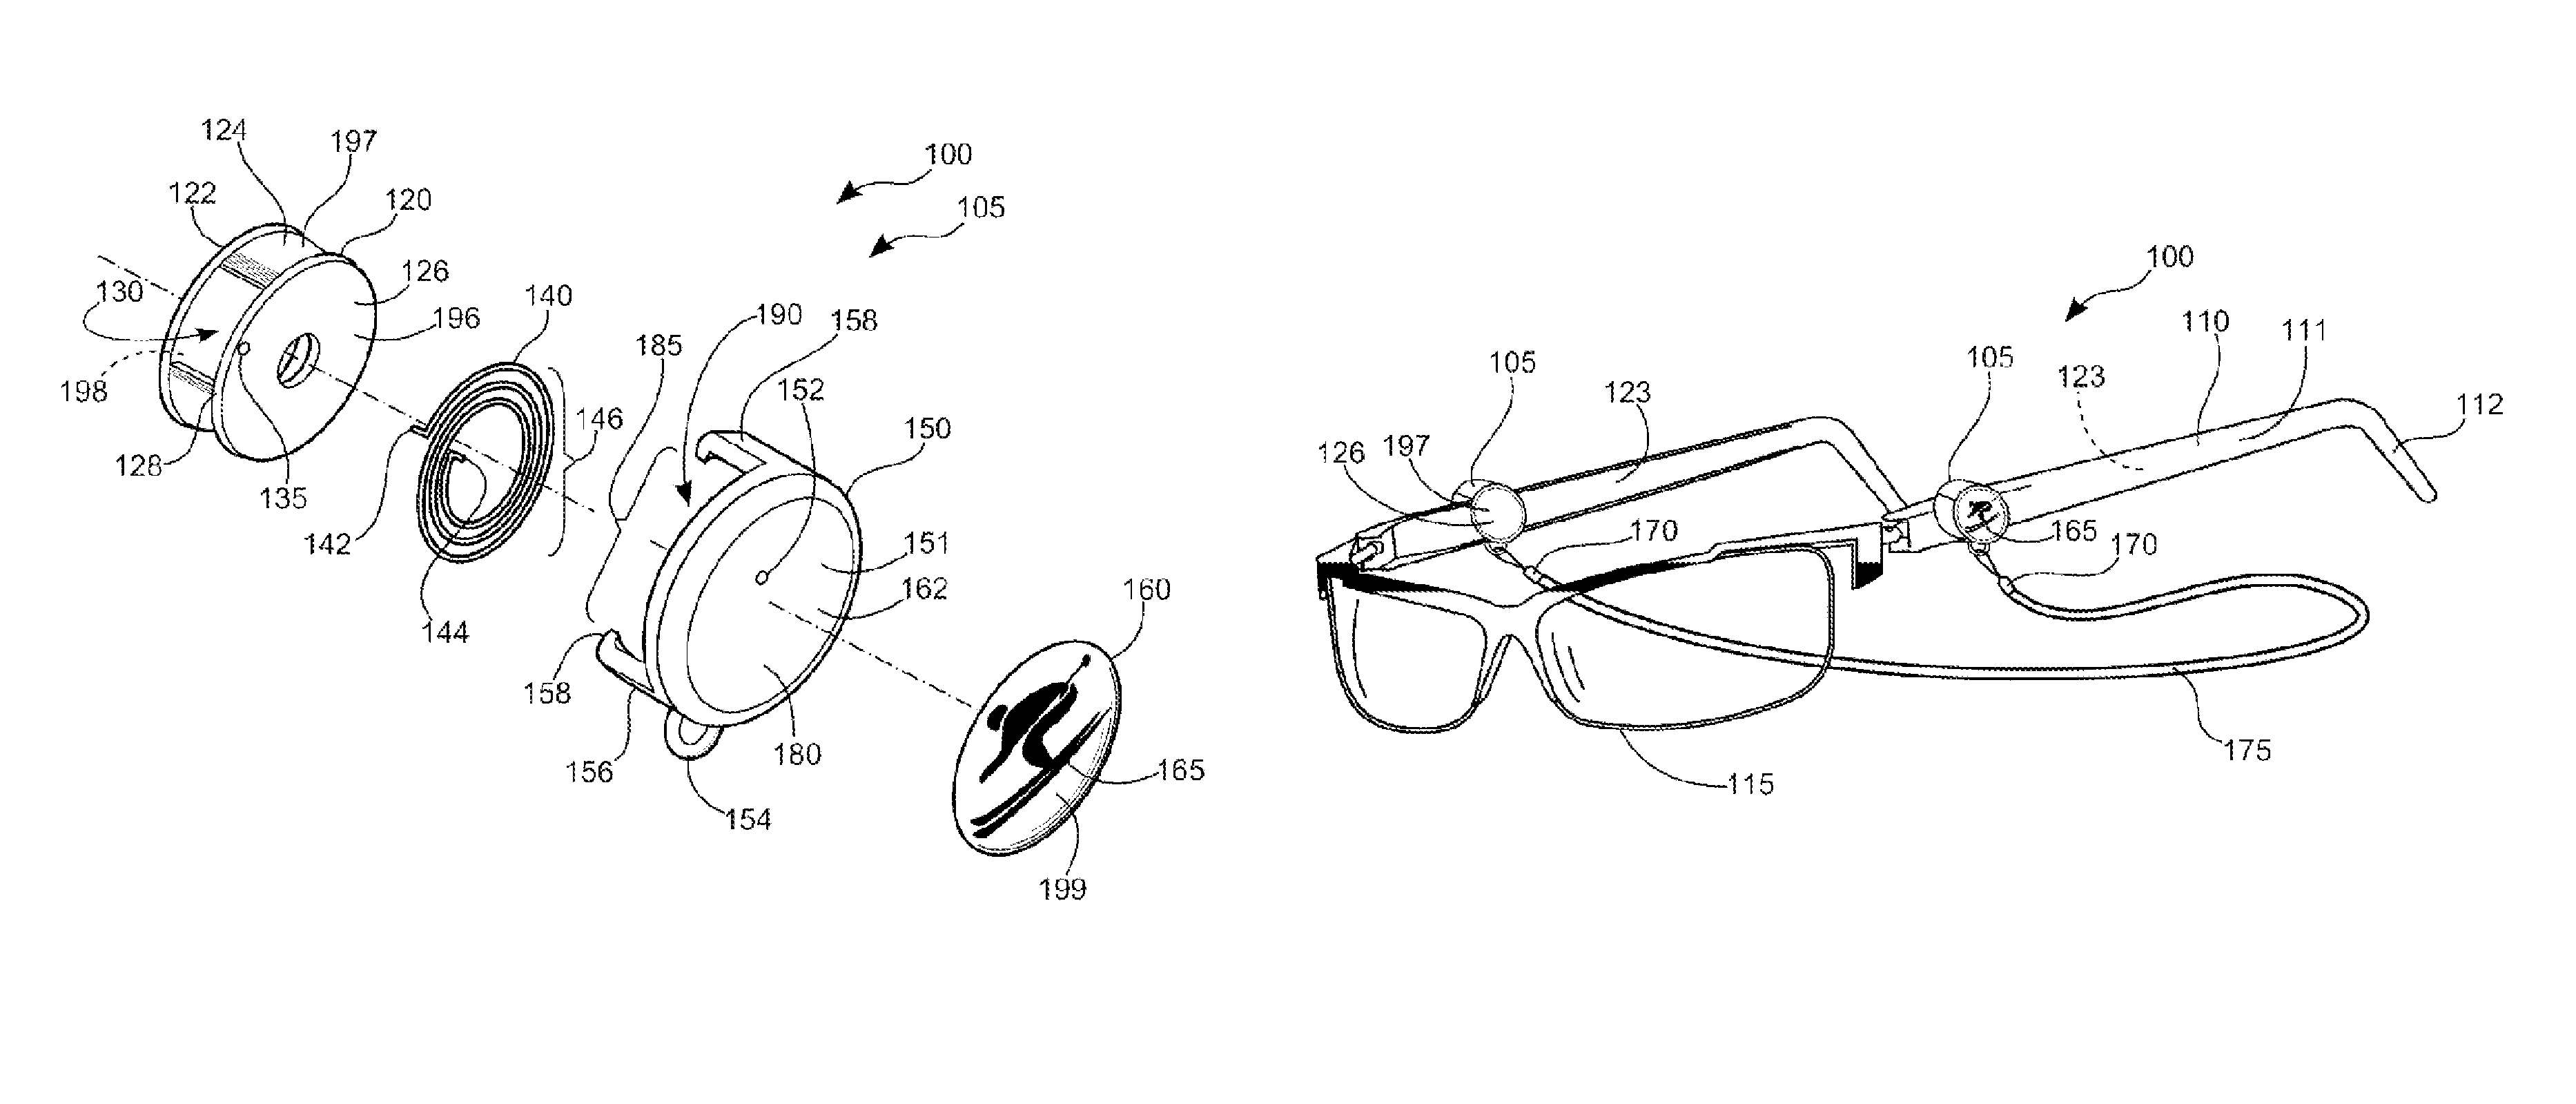 Eyeglass tether attachment systems